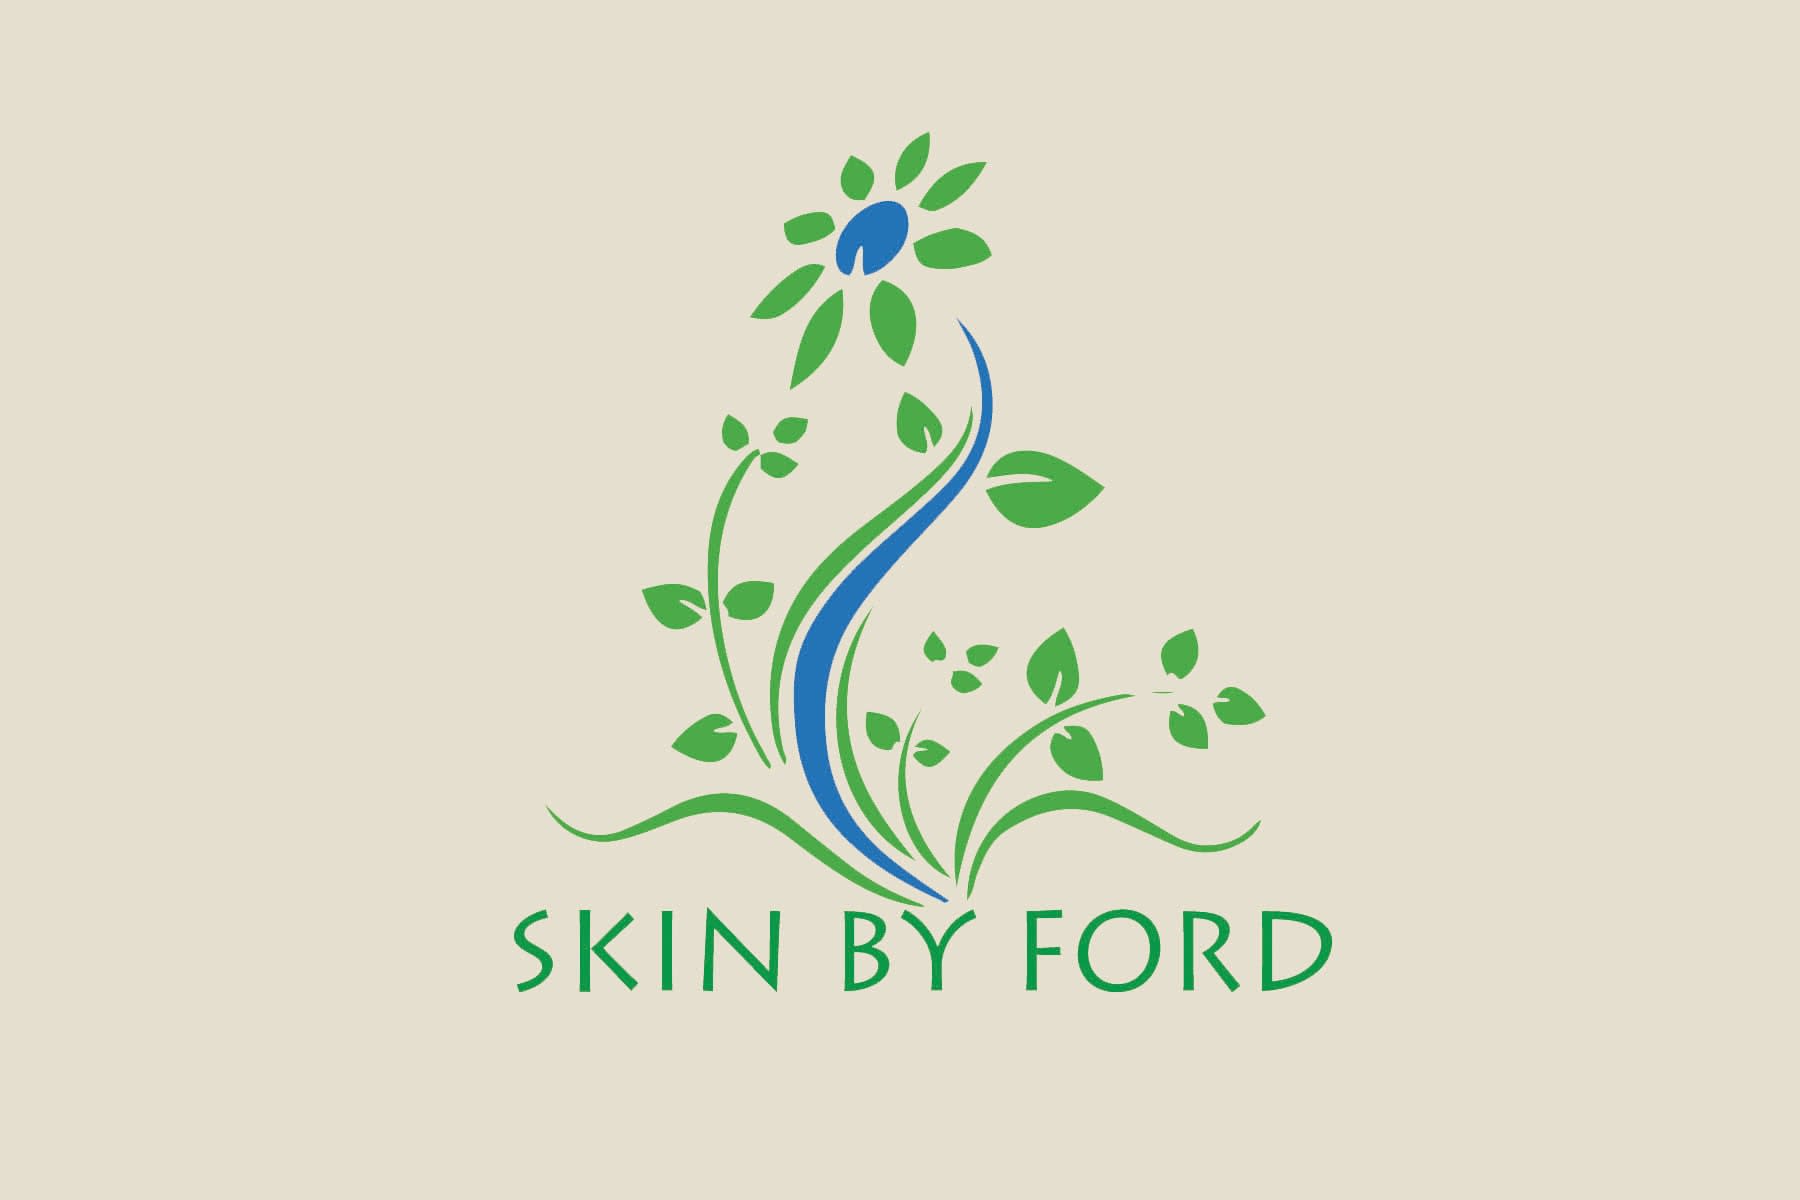 Skin by Ford Live